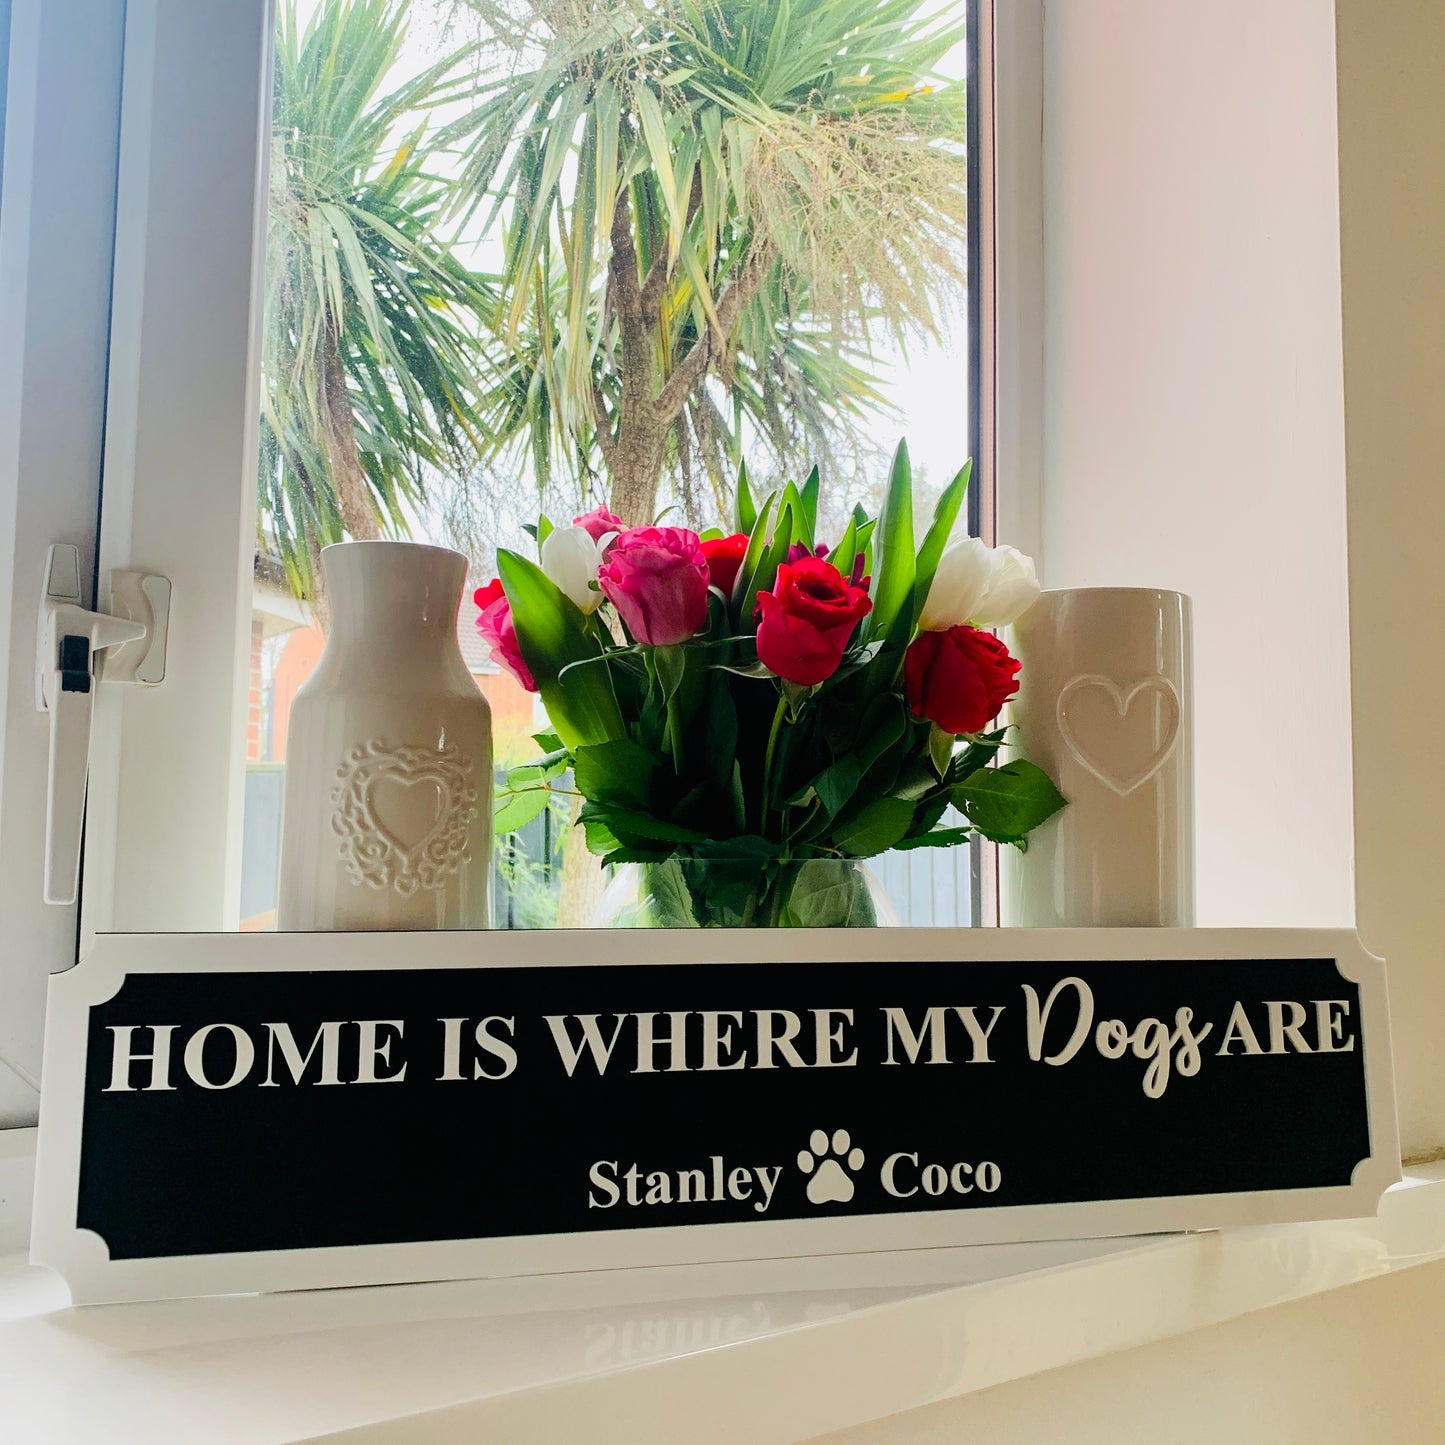 Personalised 3D Railway / Street Sign - Home Is Where My / Our Dogs Are